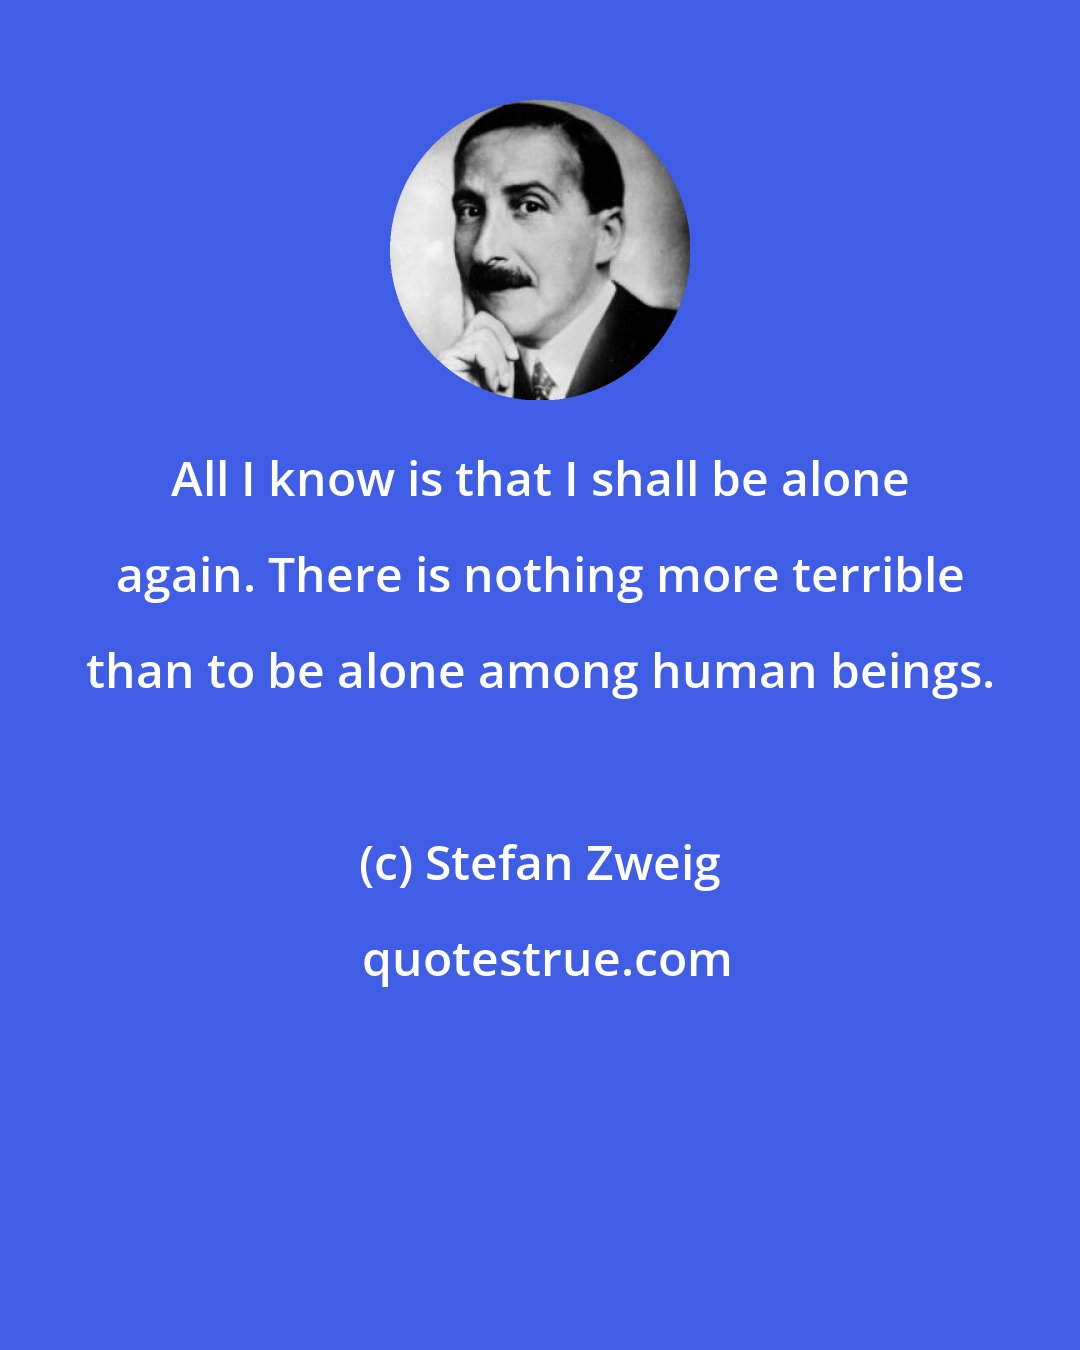 Stefan Zweig: All I know is that I shall be alone again. There is nothing more terrible than to be alone among human beings.